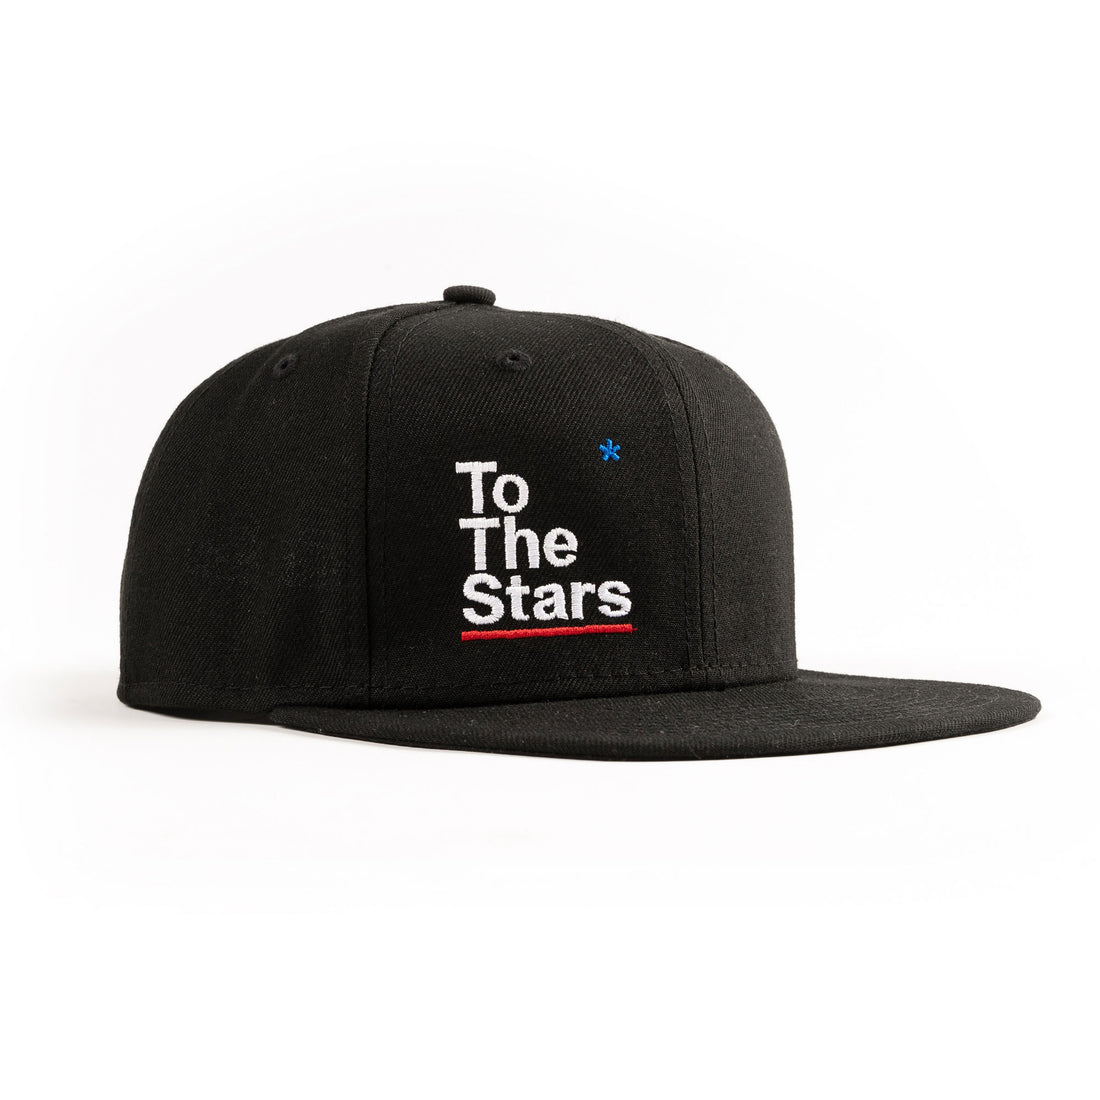 To The Stars* Package Snapback Hat Black Side